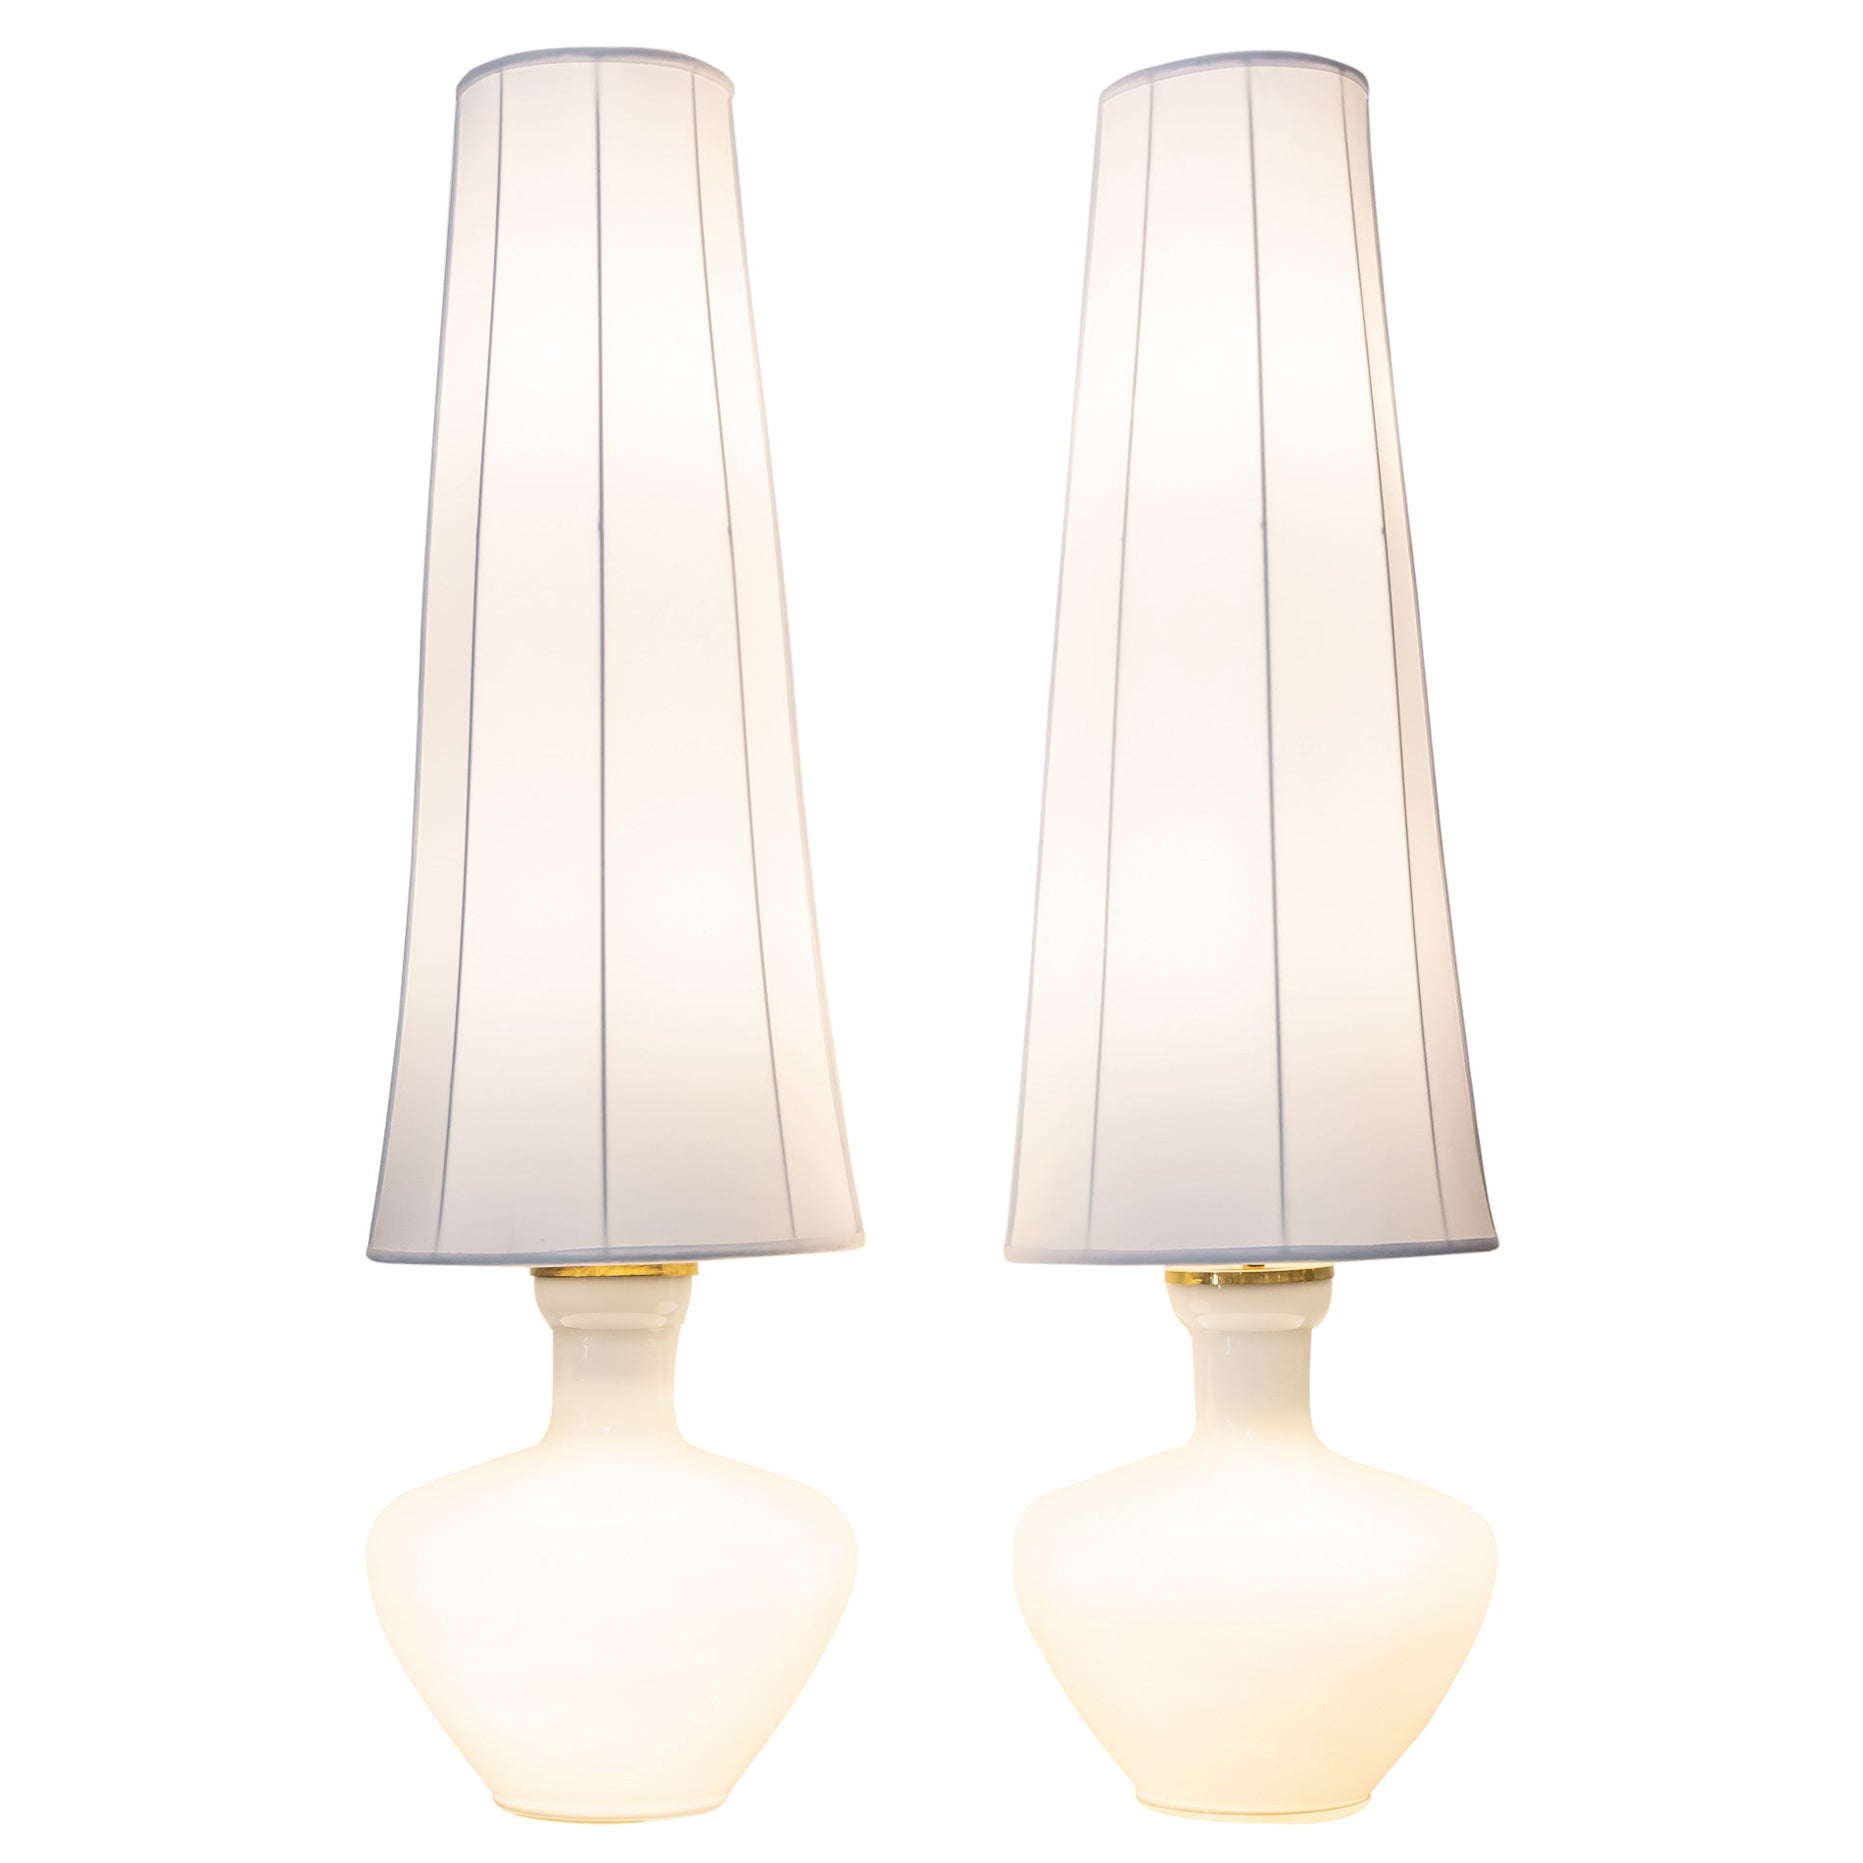 Pair of Tall Cased Glass Lamps with Silk Shades